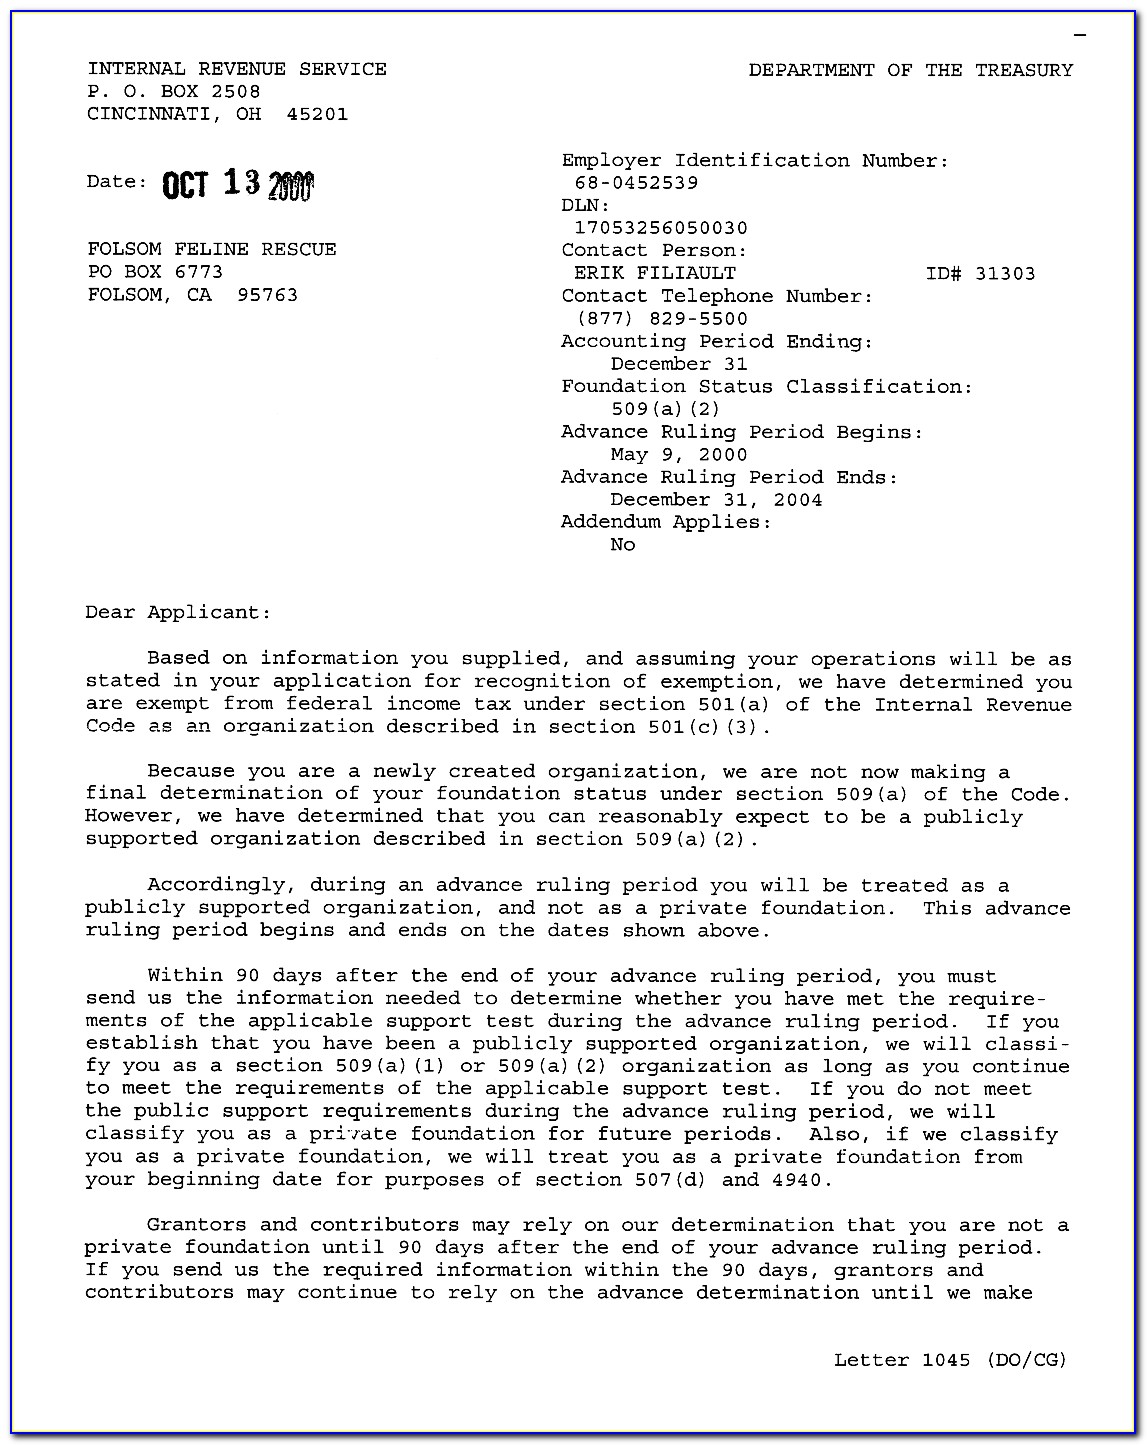 Lost Irs 501c3 Determination Letter